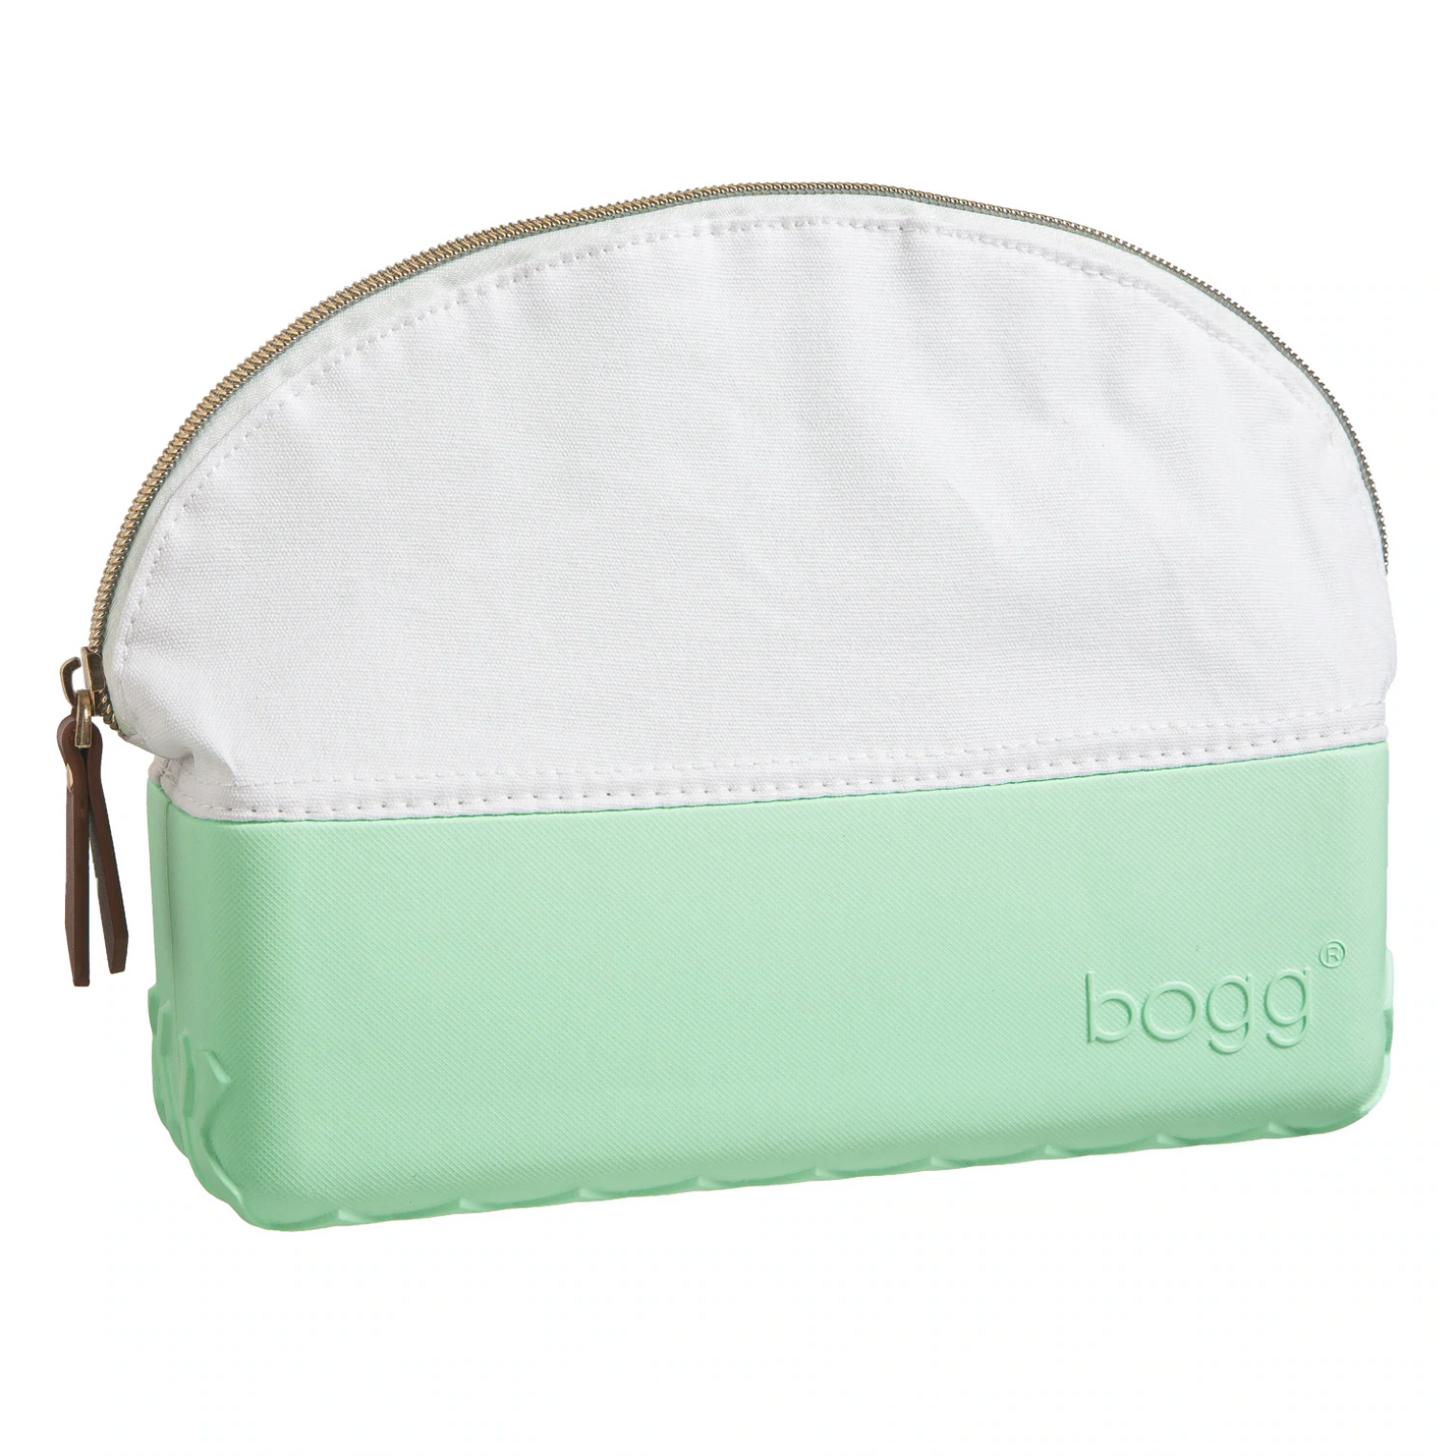 Beauty and the Bogg Bag